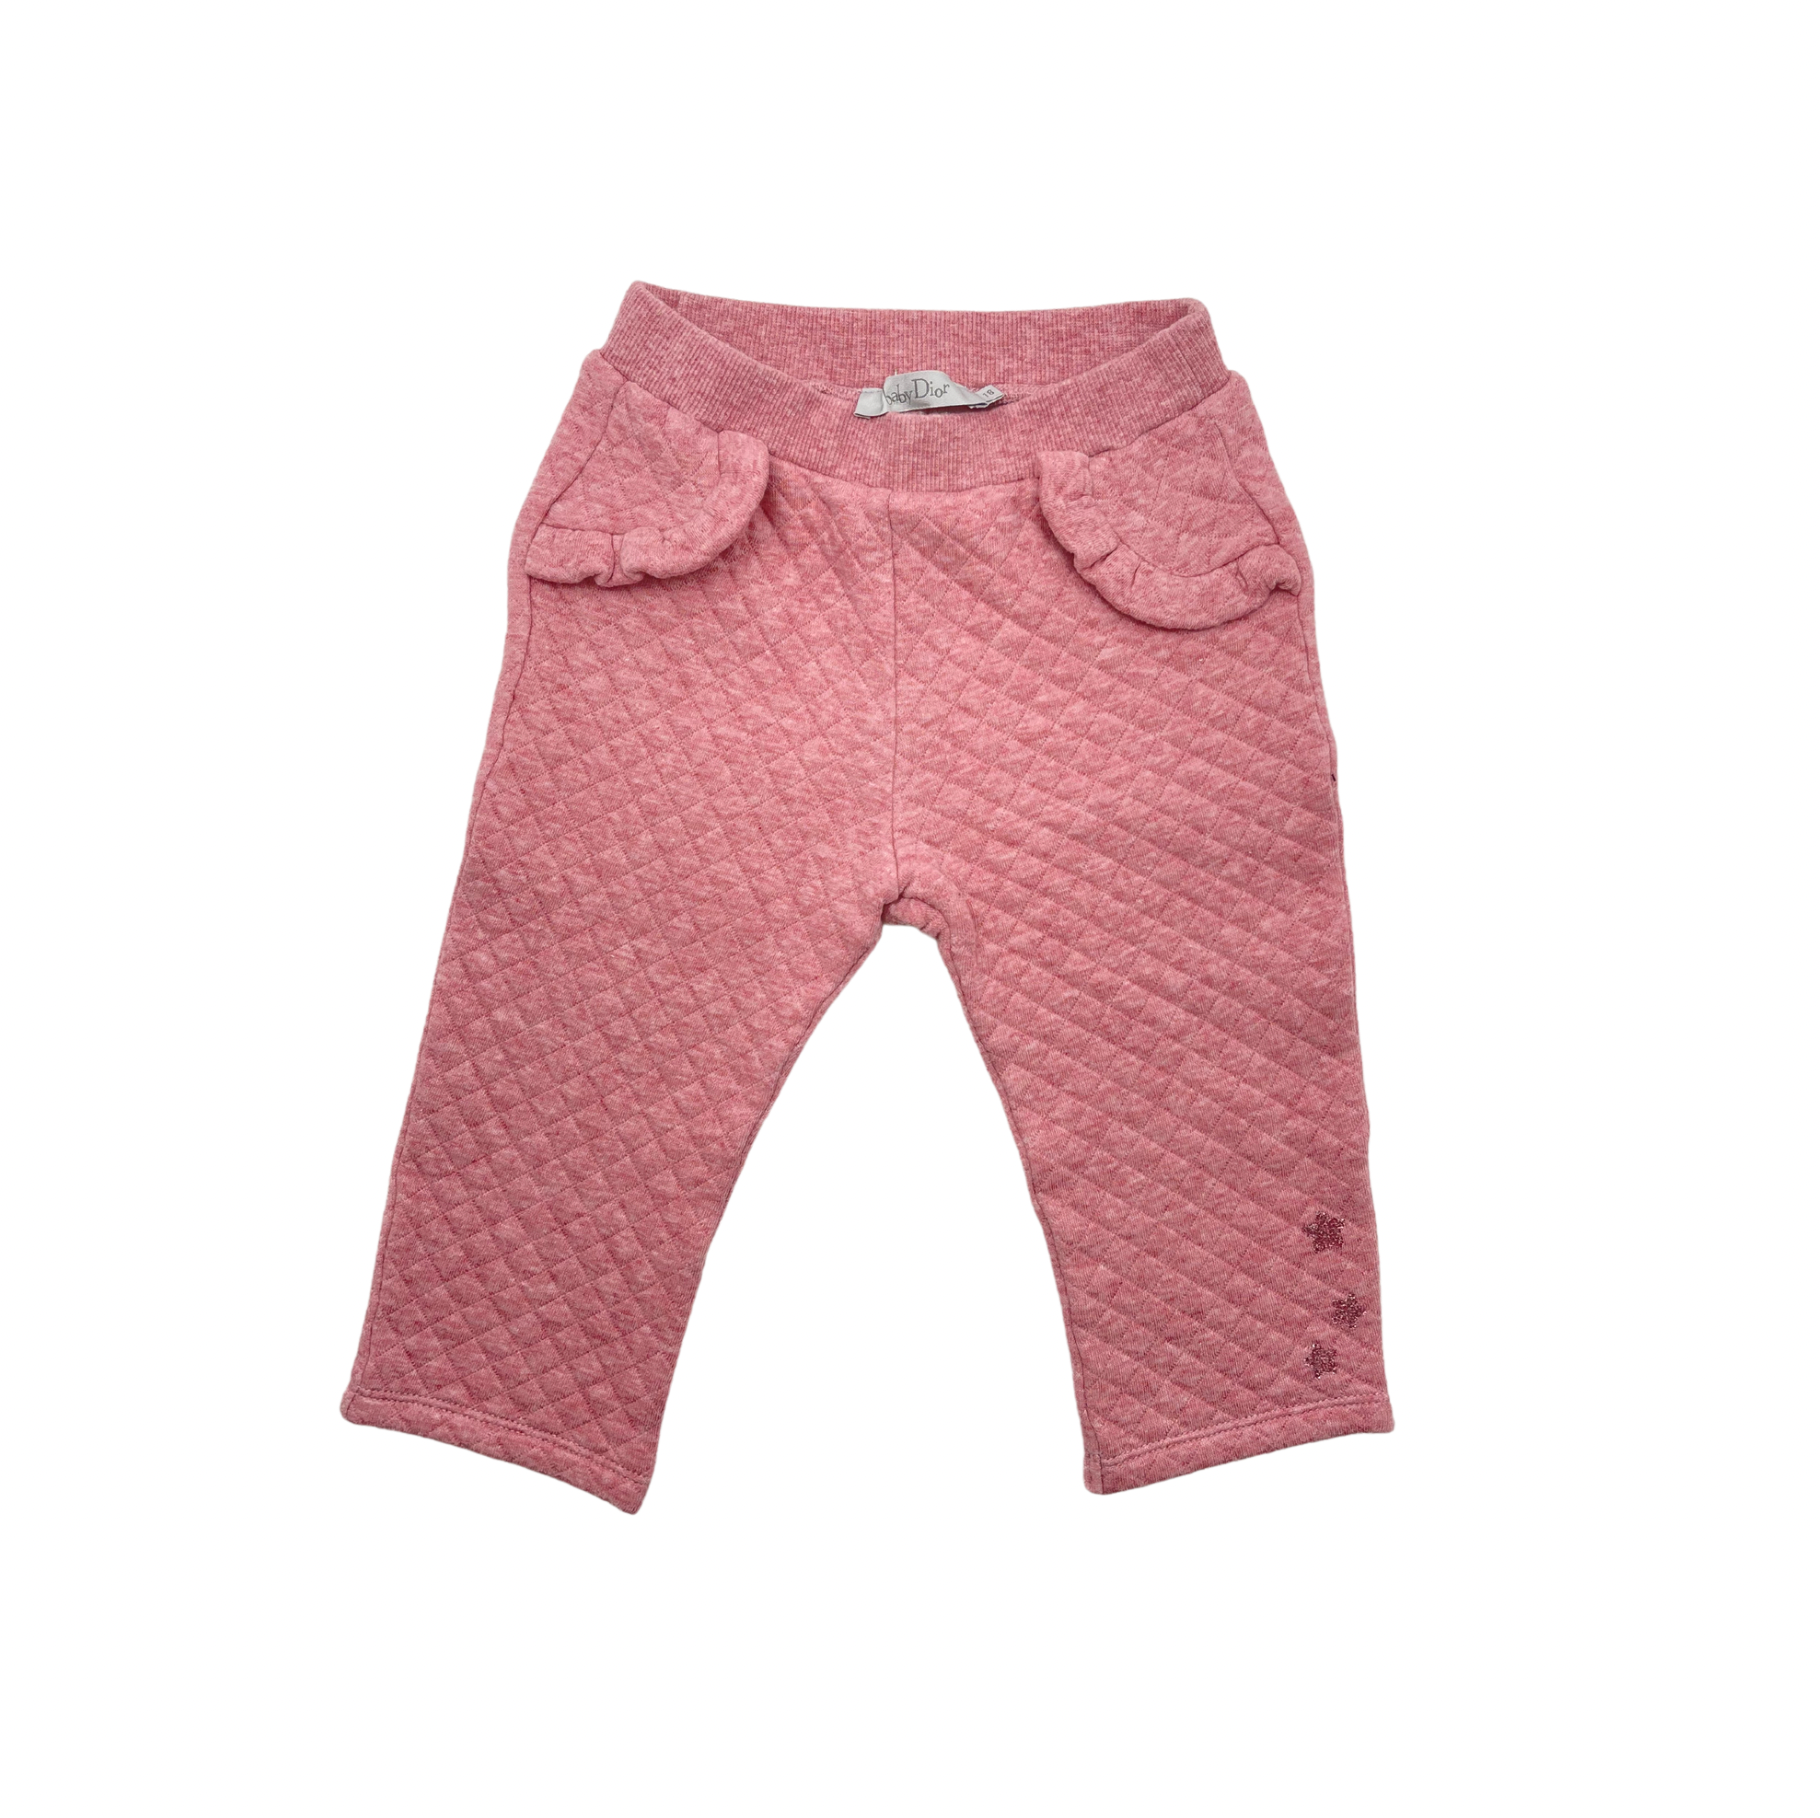 BABY DIOR - Pink pants - 18 months